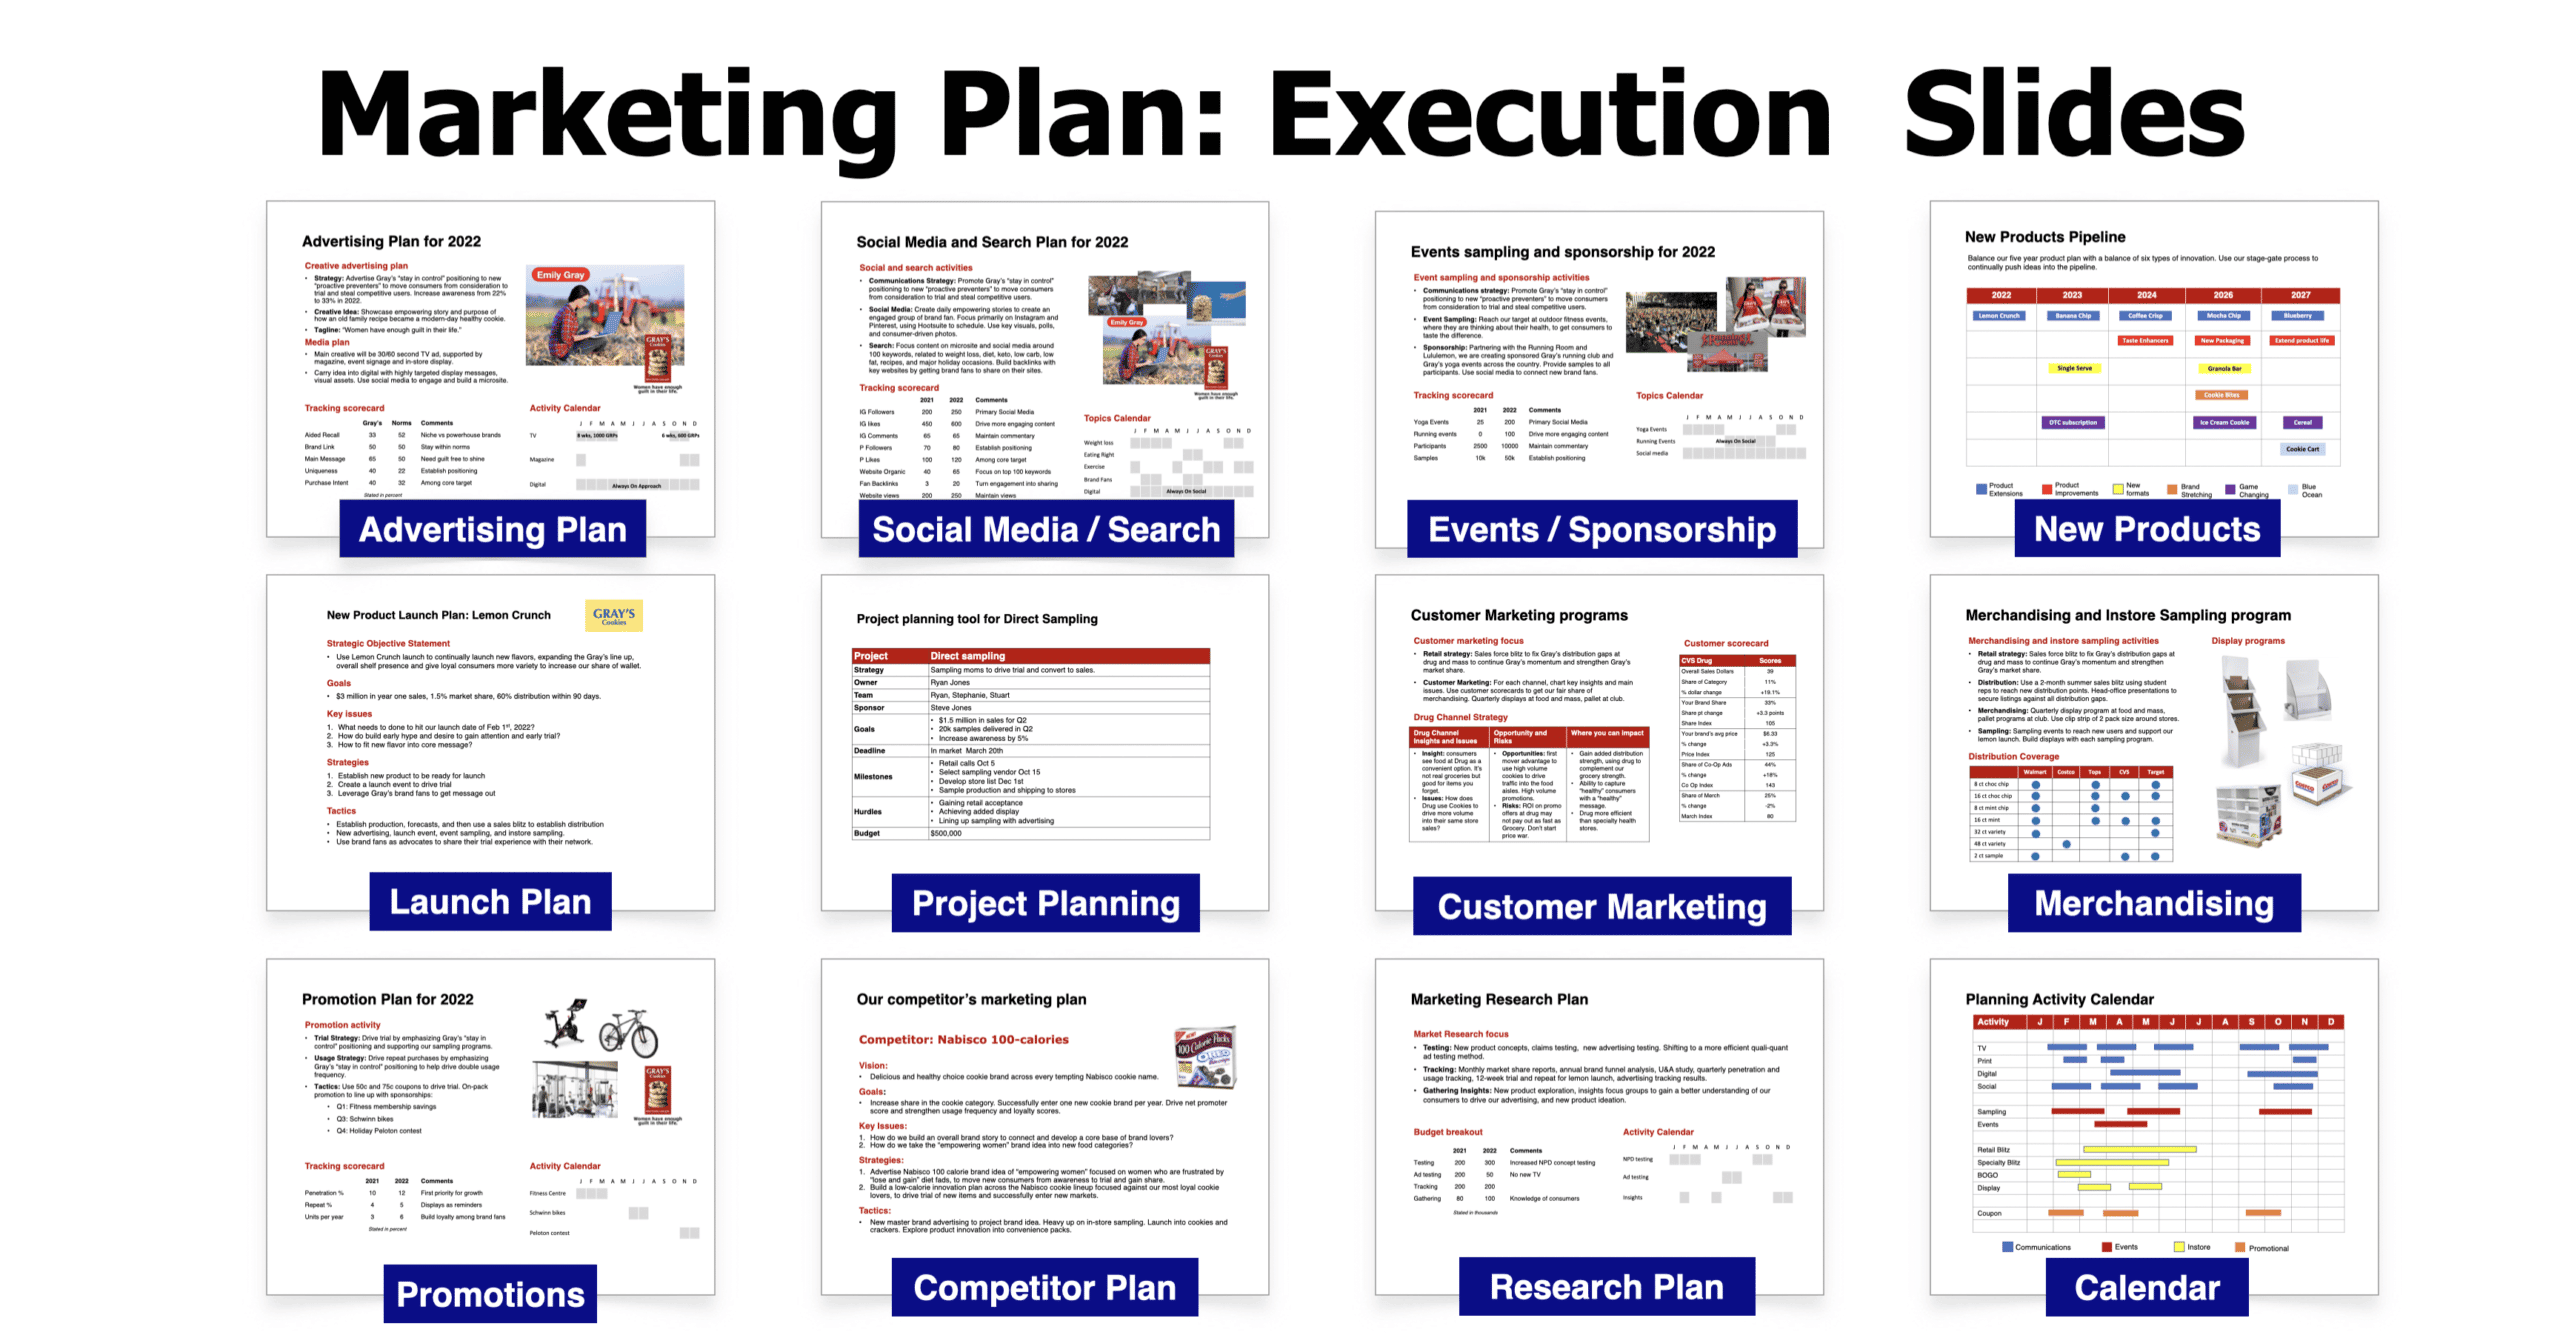 Marketing Plan example using our Marketing Plan template